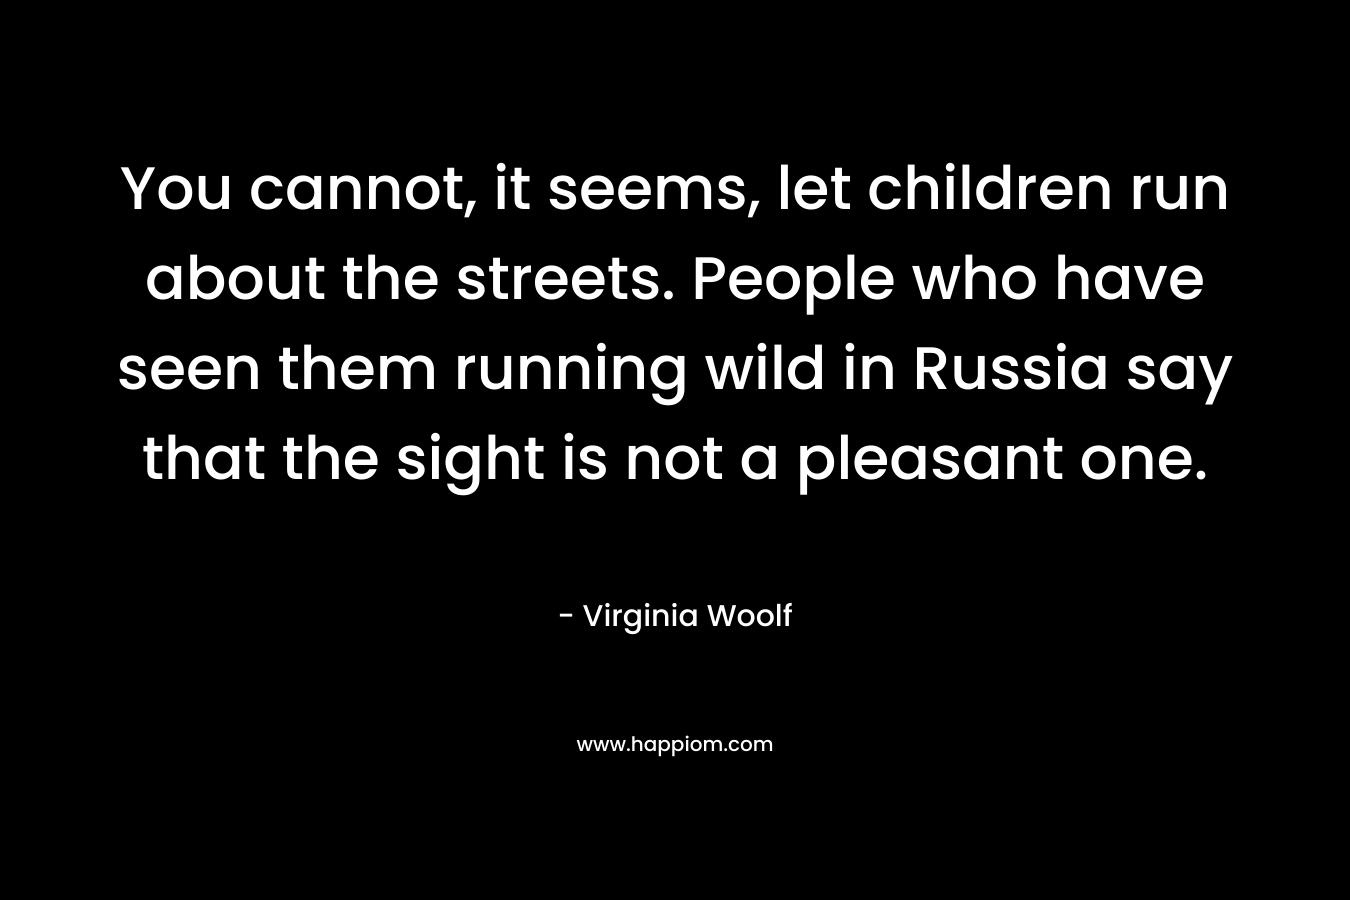 You cannot, it seems, let children run about the streets. People who have seen them running wild in Russia say that the sight is not a pleasant one. – Virginia Woolf